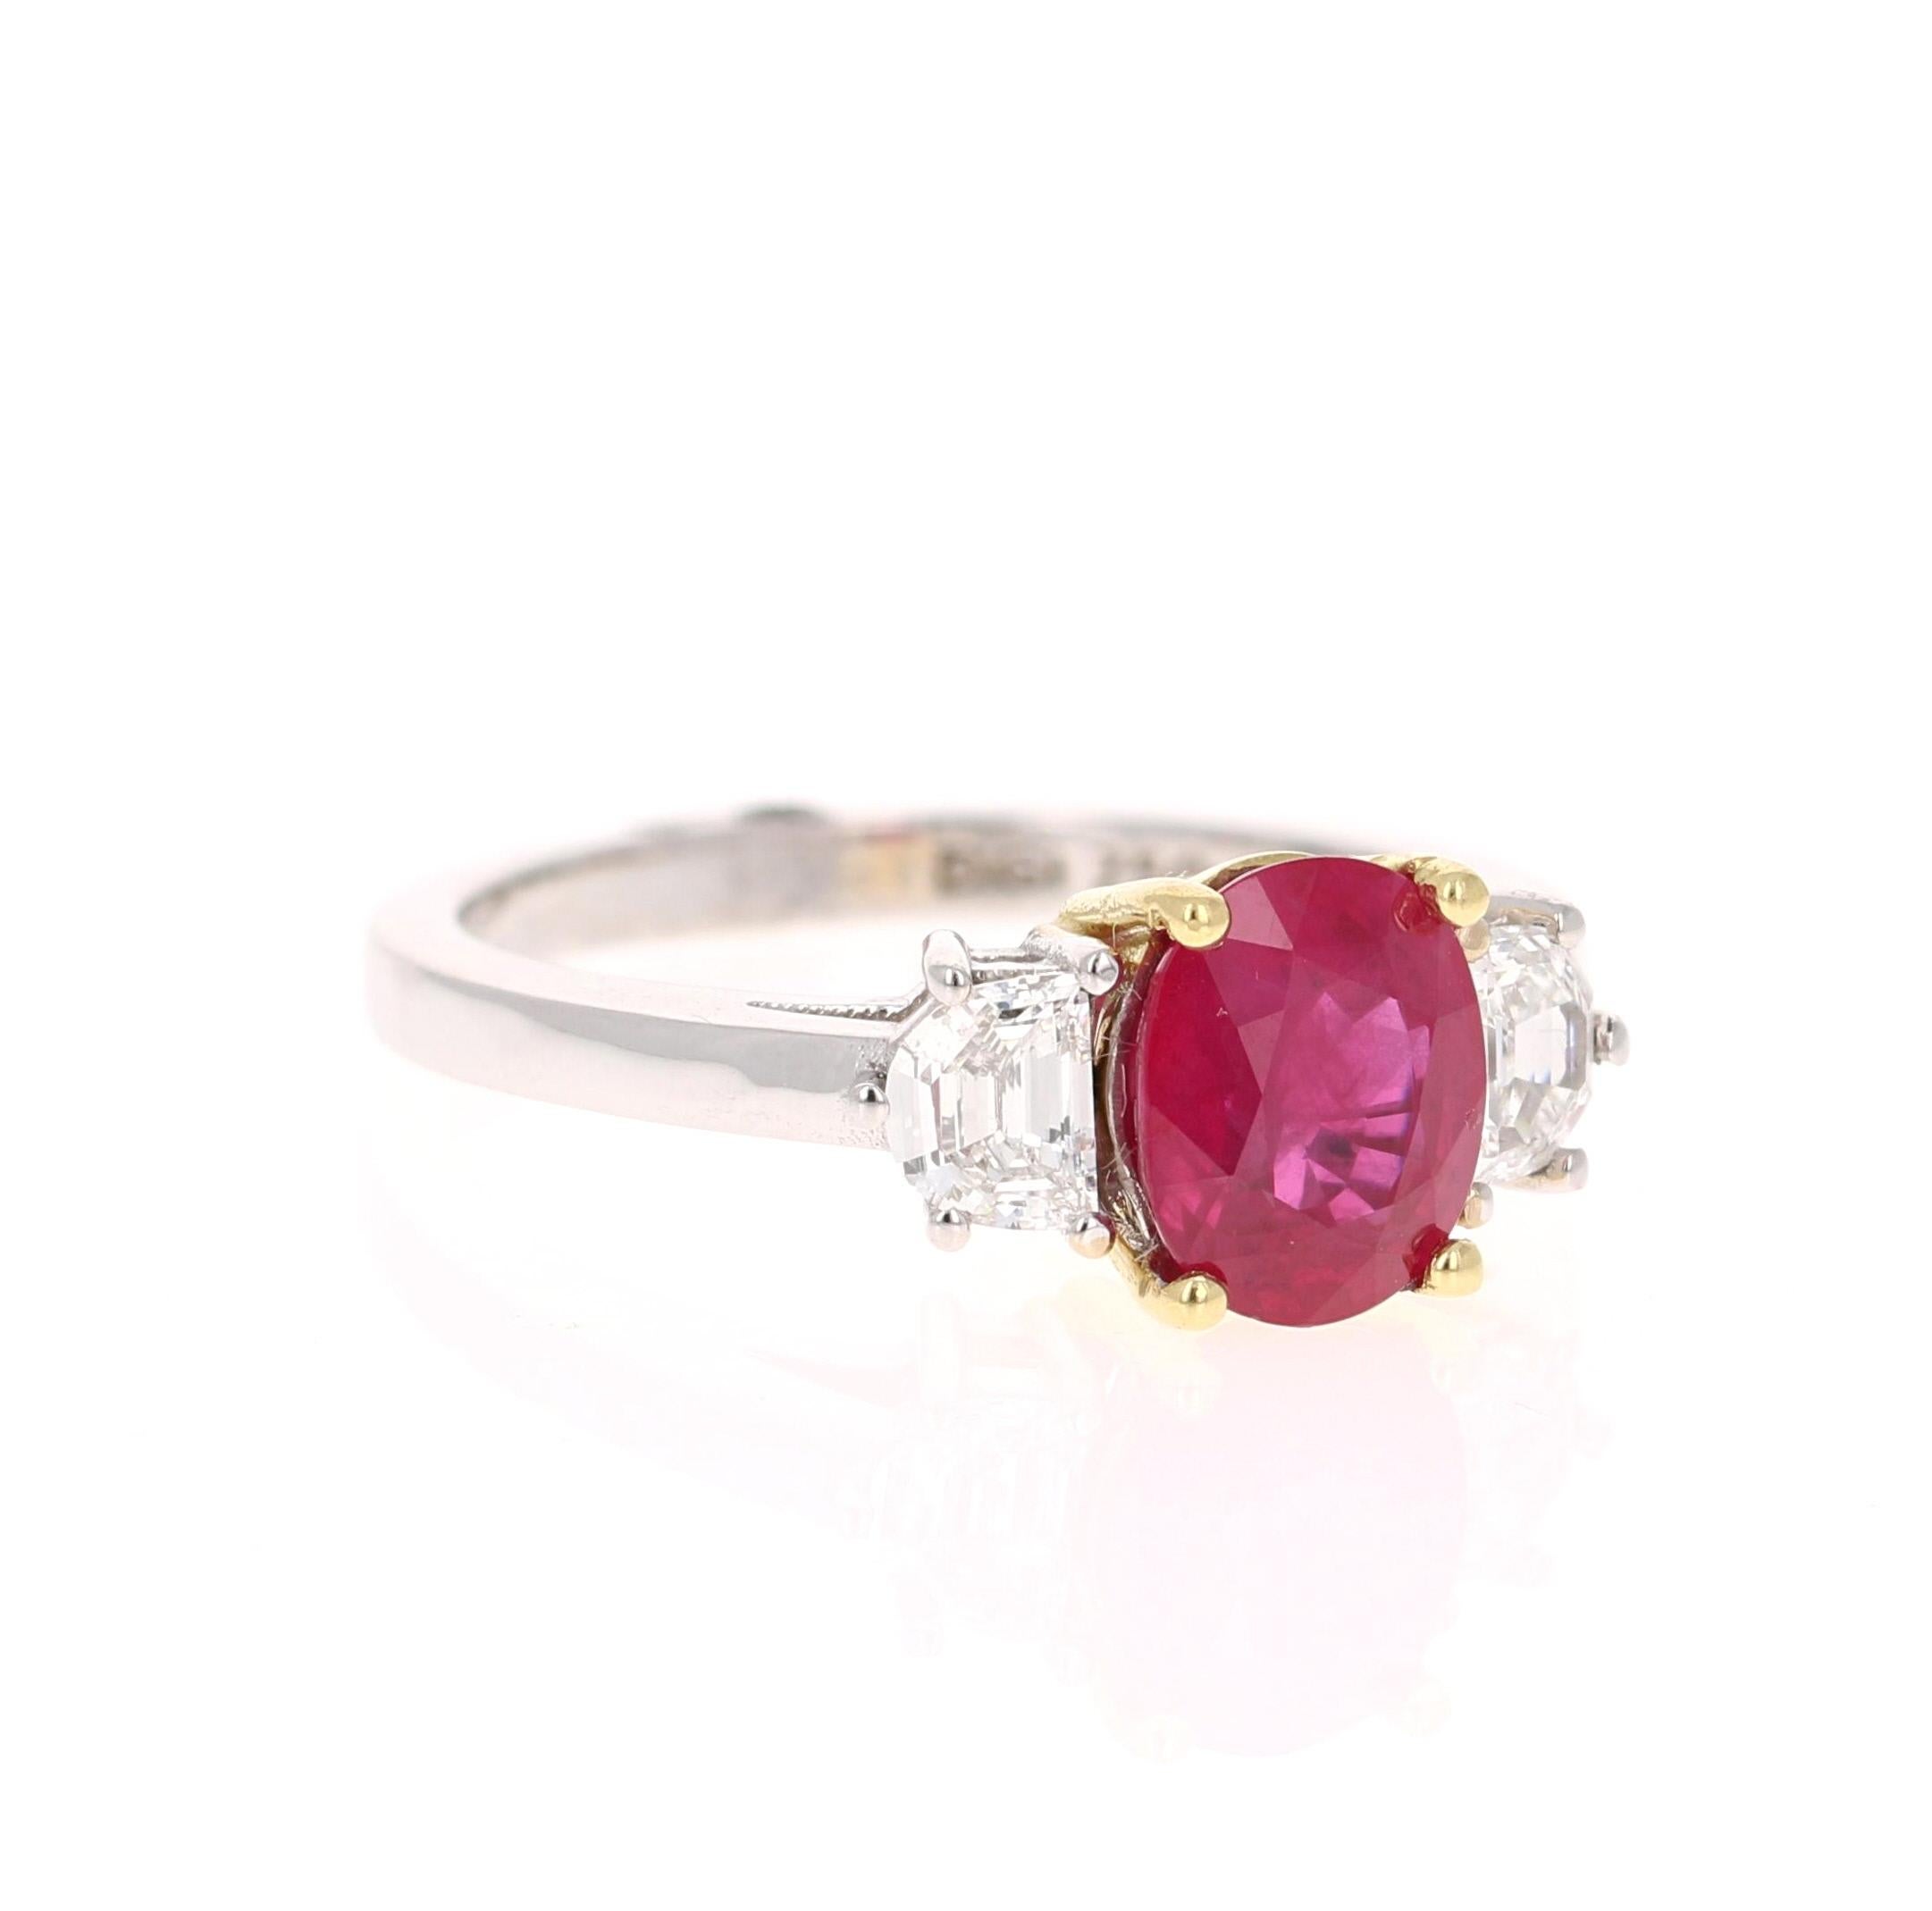 Simply beautiful 3-Stone Ruby Diamond Ring with a Oval Cut 2.02 Carat Natural Ruby which is surrounded by 2 Half Moon Cut Diamonds that weigh 0.51 carats. (Clarity: VS, Color: F) 
Total Carat Weight of the Ring is 2.53 carats. 

The GIA Certificate